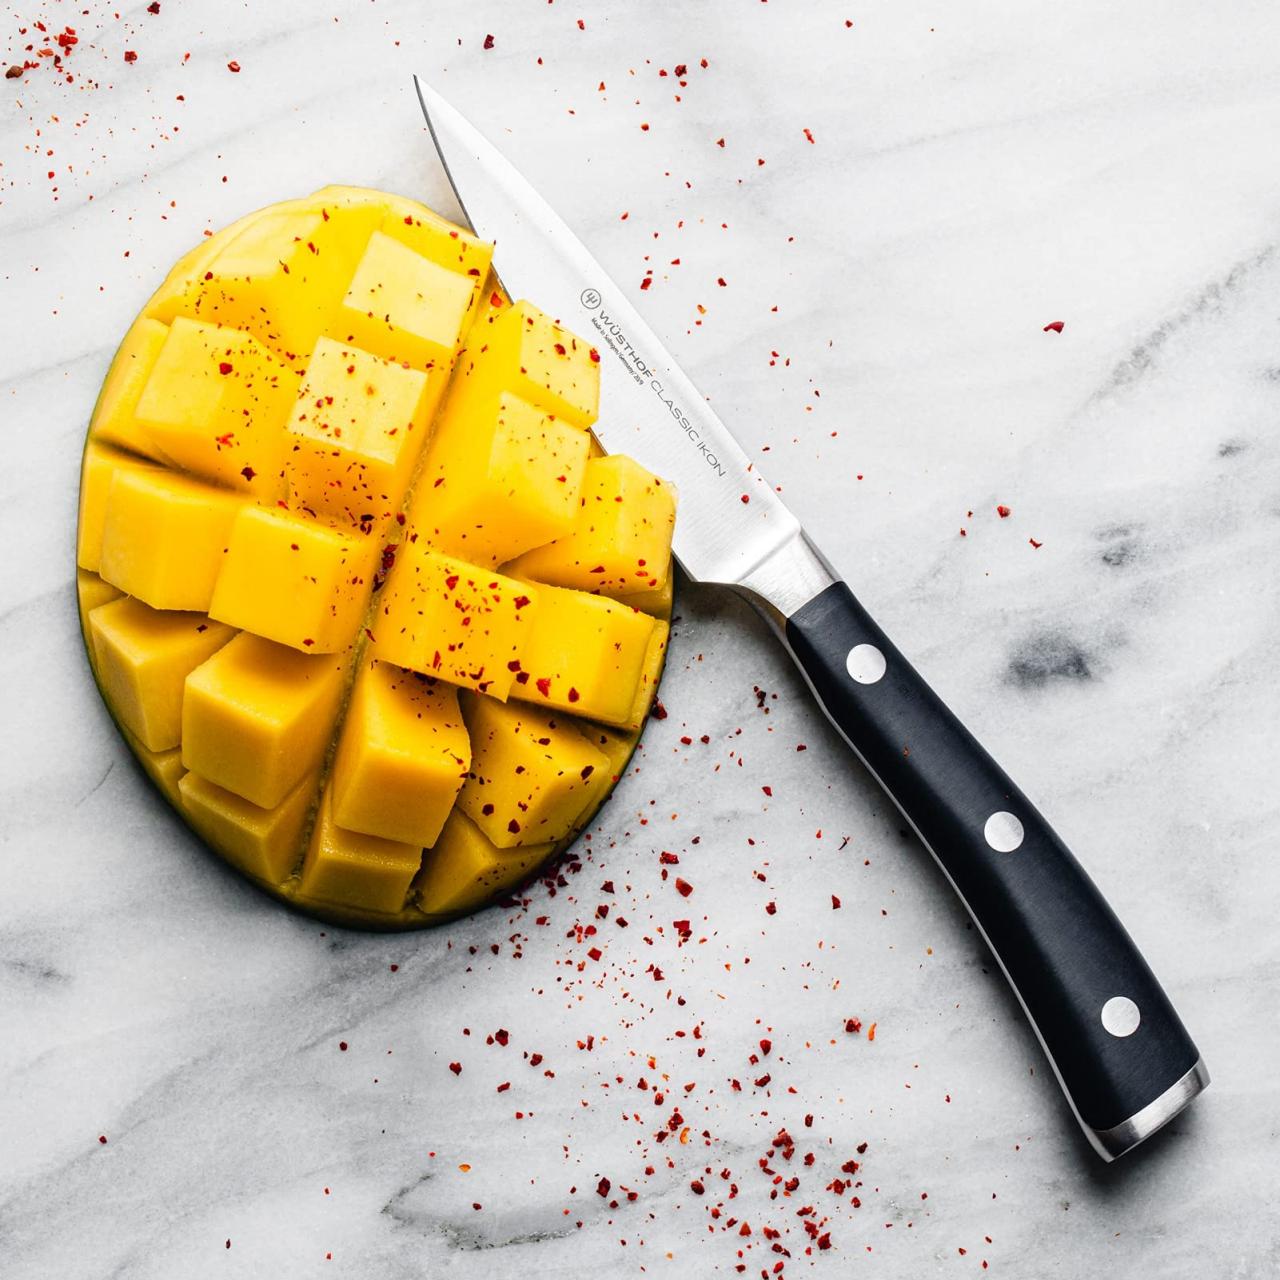 The Best Paring Knives to Buy in 2021